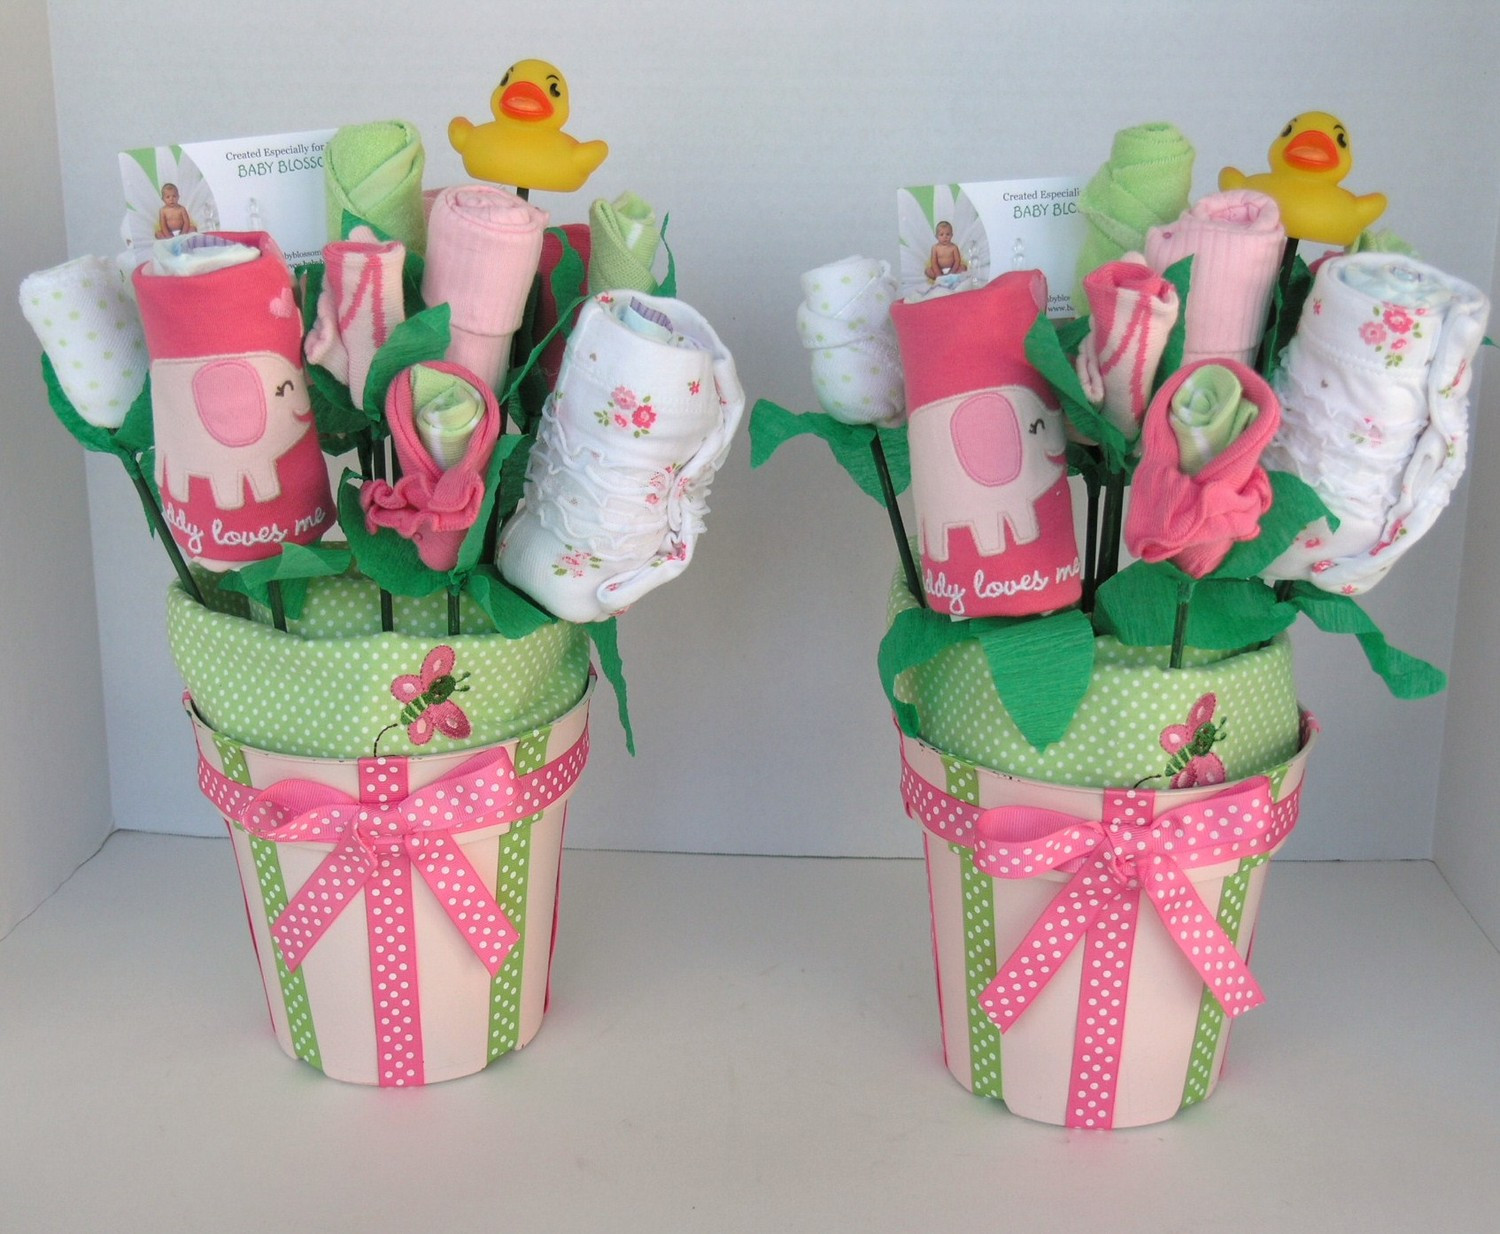 DIY Baby Gifts For Girls
 Five Best DIY Baby Gifting Ideas for The Little Special